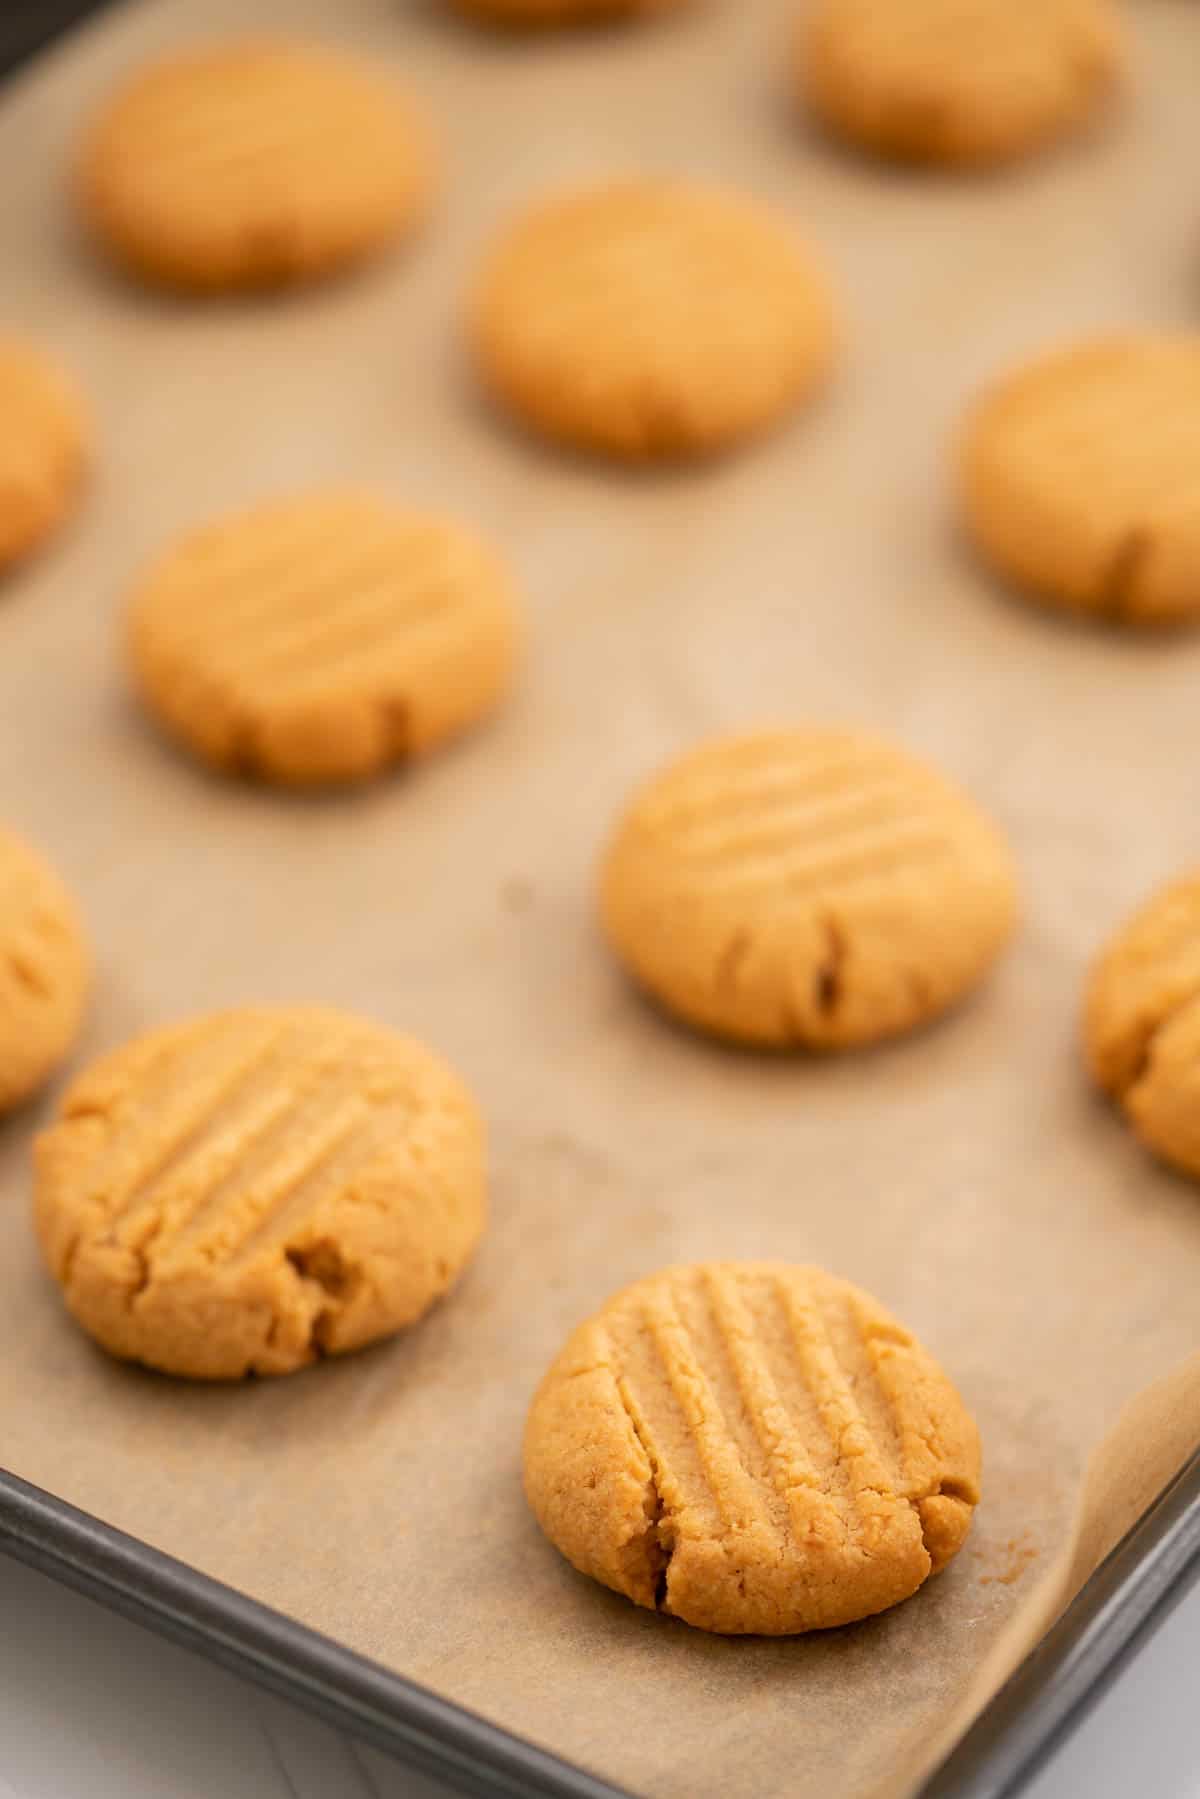 Baked cookies ready to come out of the oven on a baking paper lined tray.